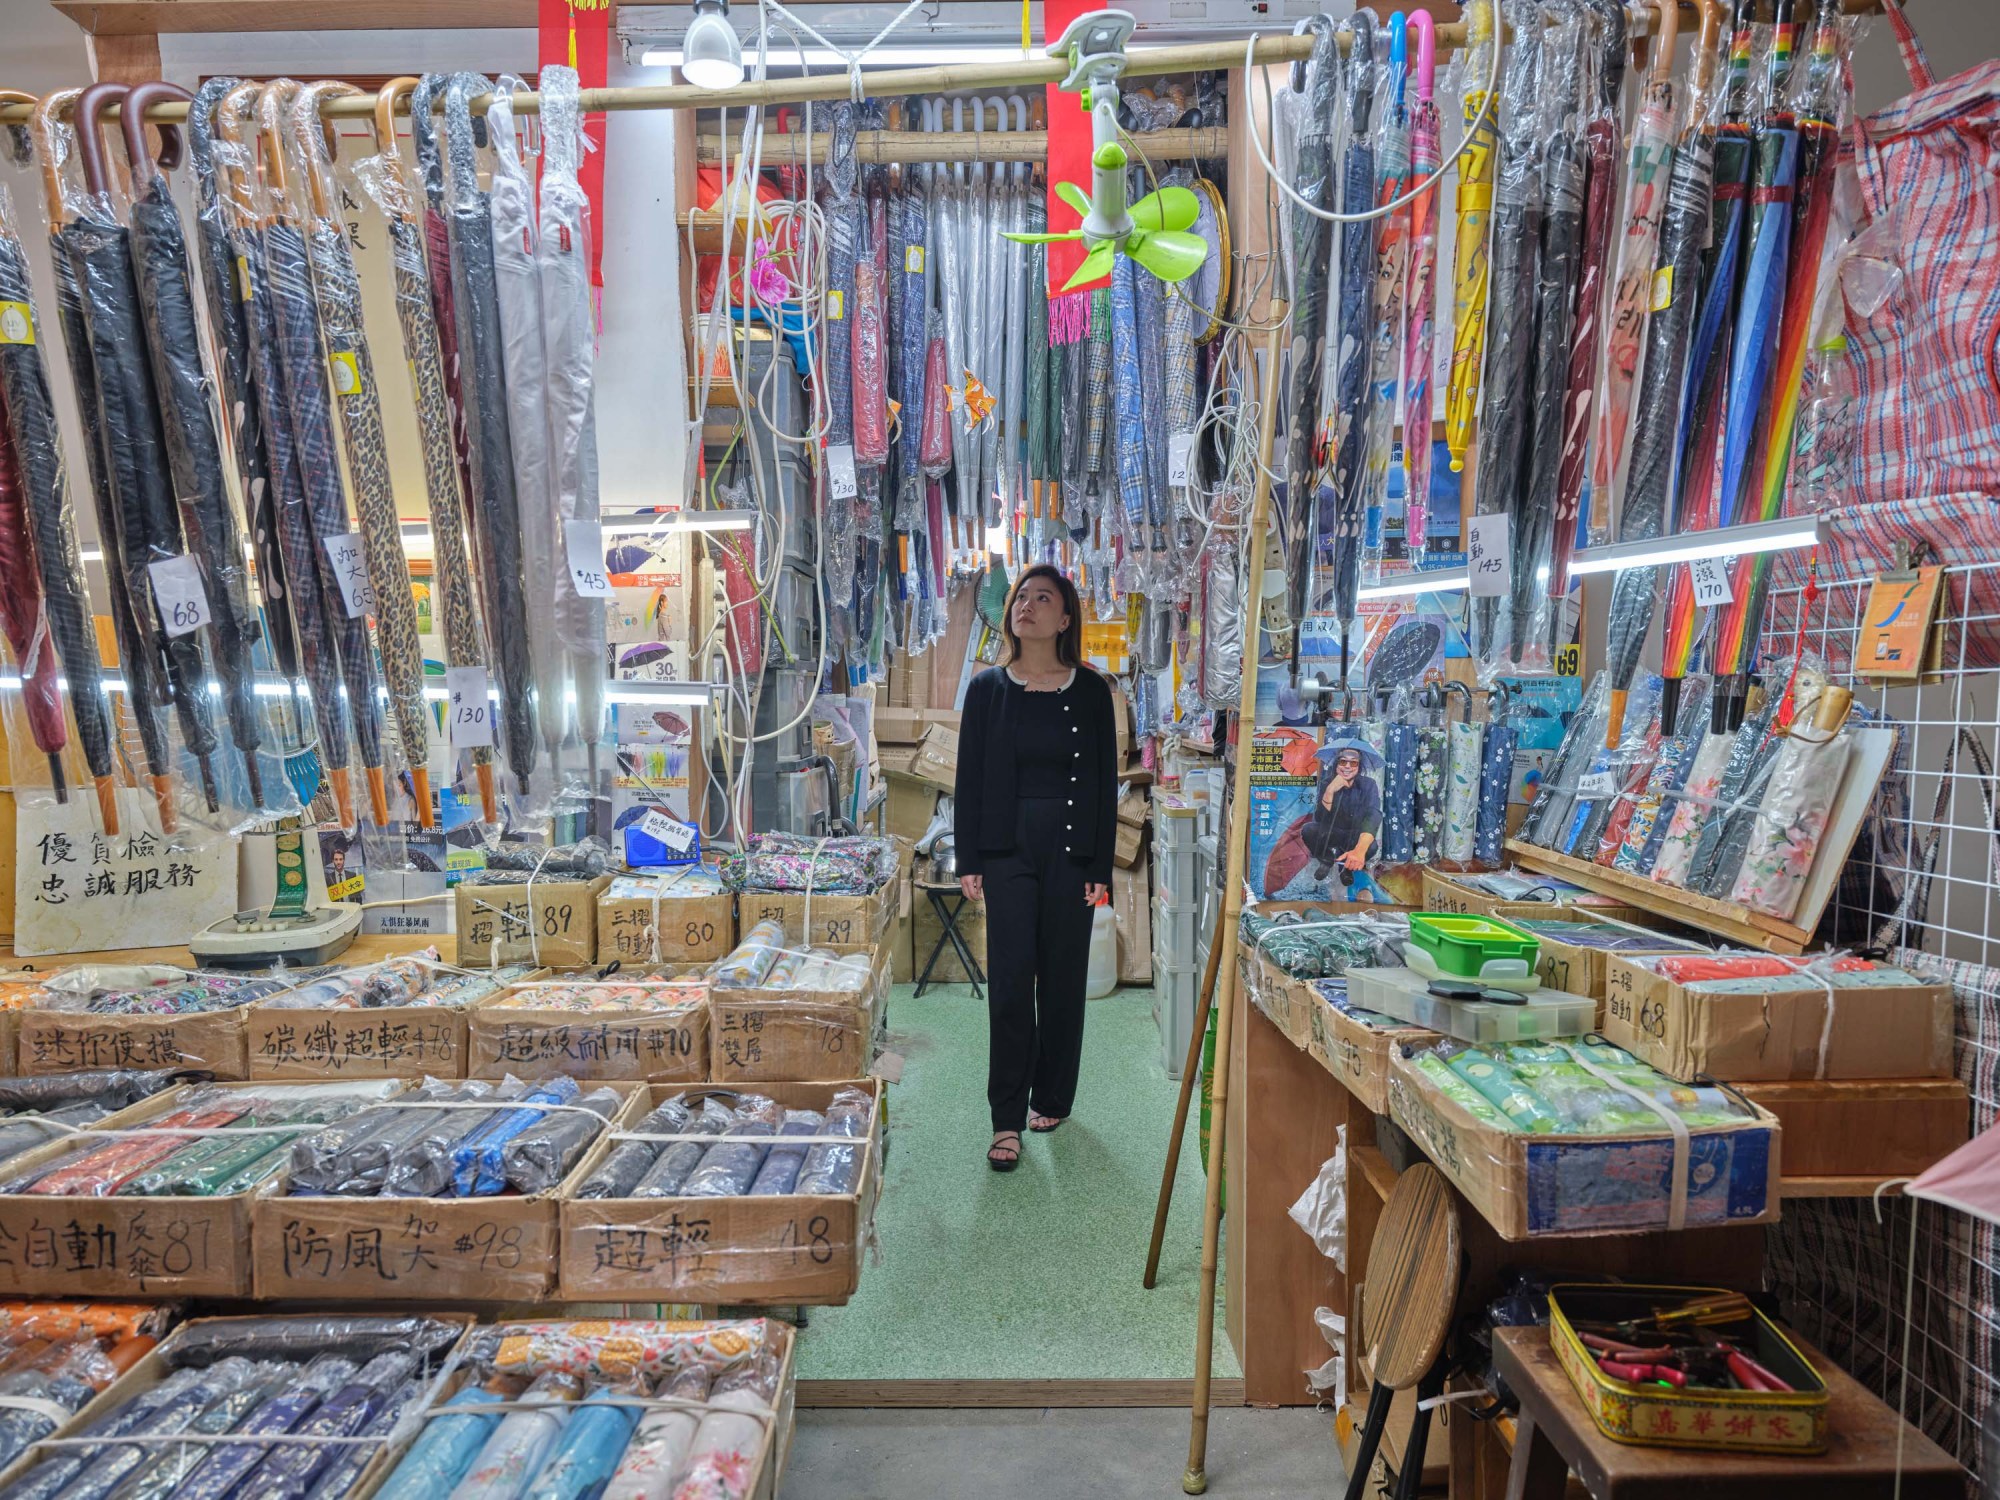 An Asian woman looks up at umbrellas in plastic sleeves in an apparently cluttered and full shop of umbrellas.